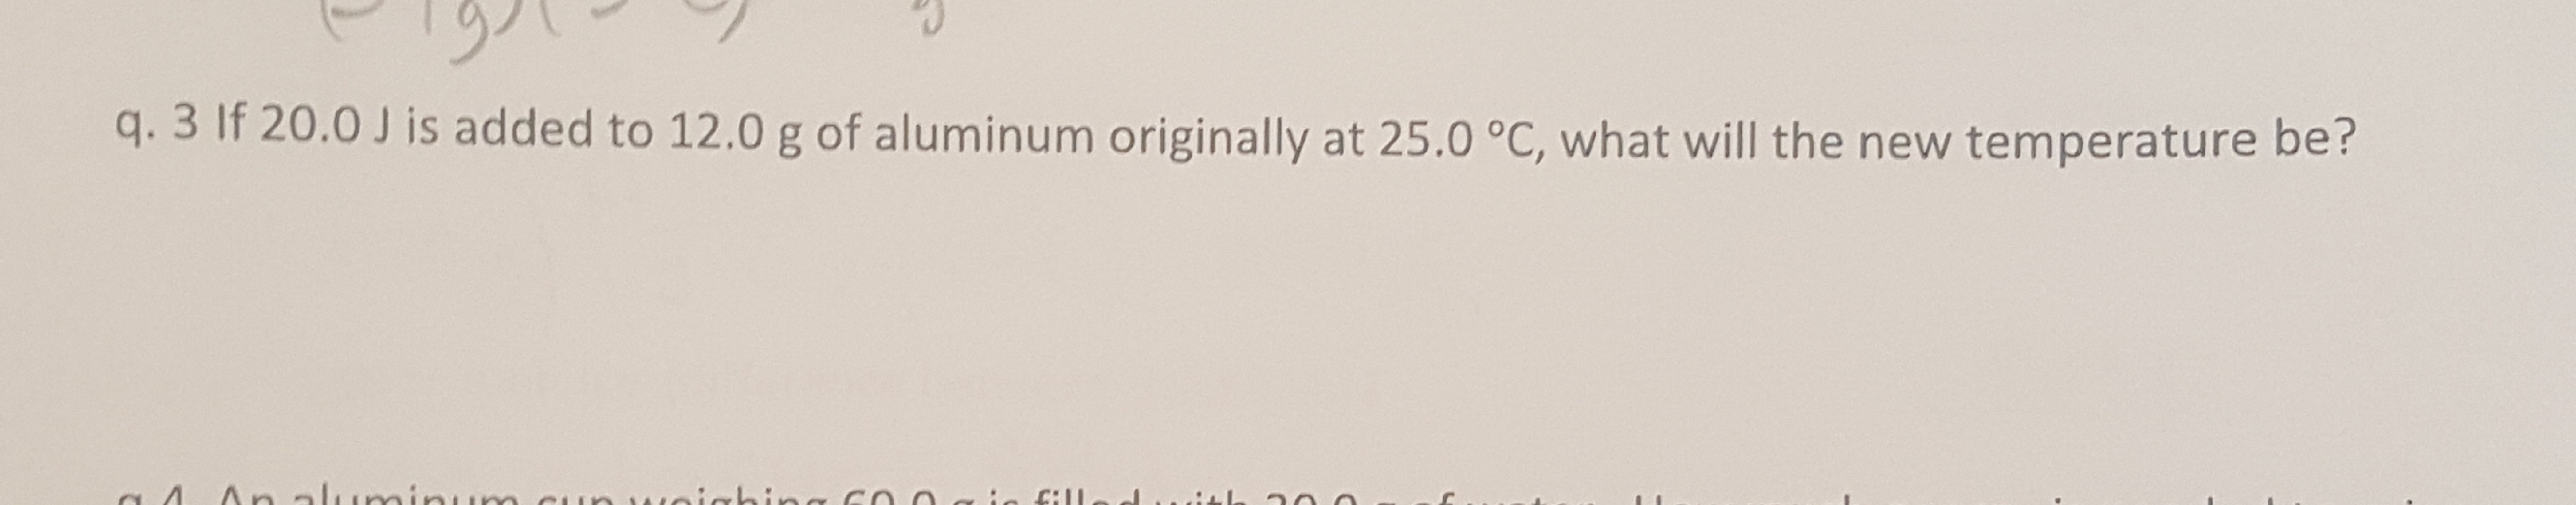 q. 3 If 20.0 J is added to 12.0 g of aluminum originally at 25.0 °C, what will the new temperature be?
